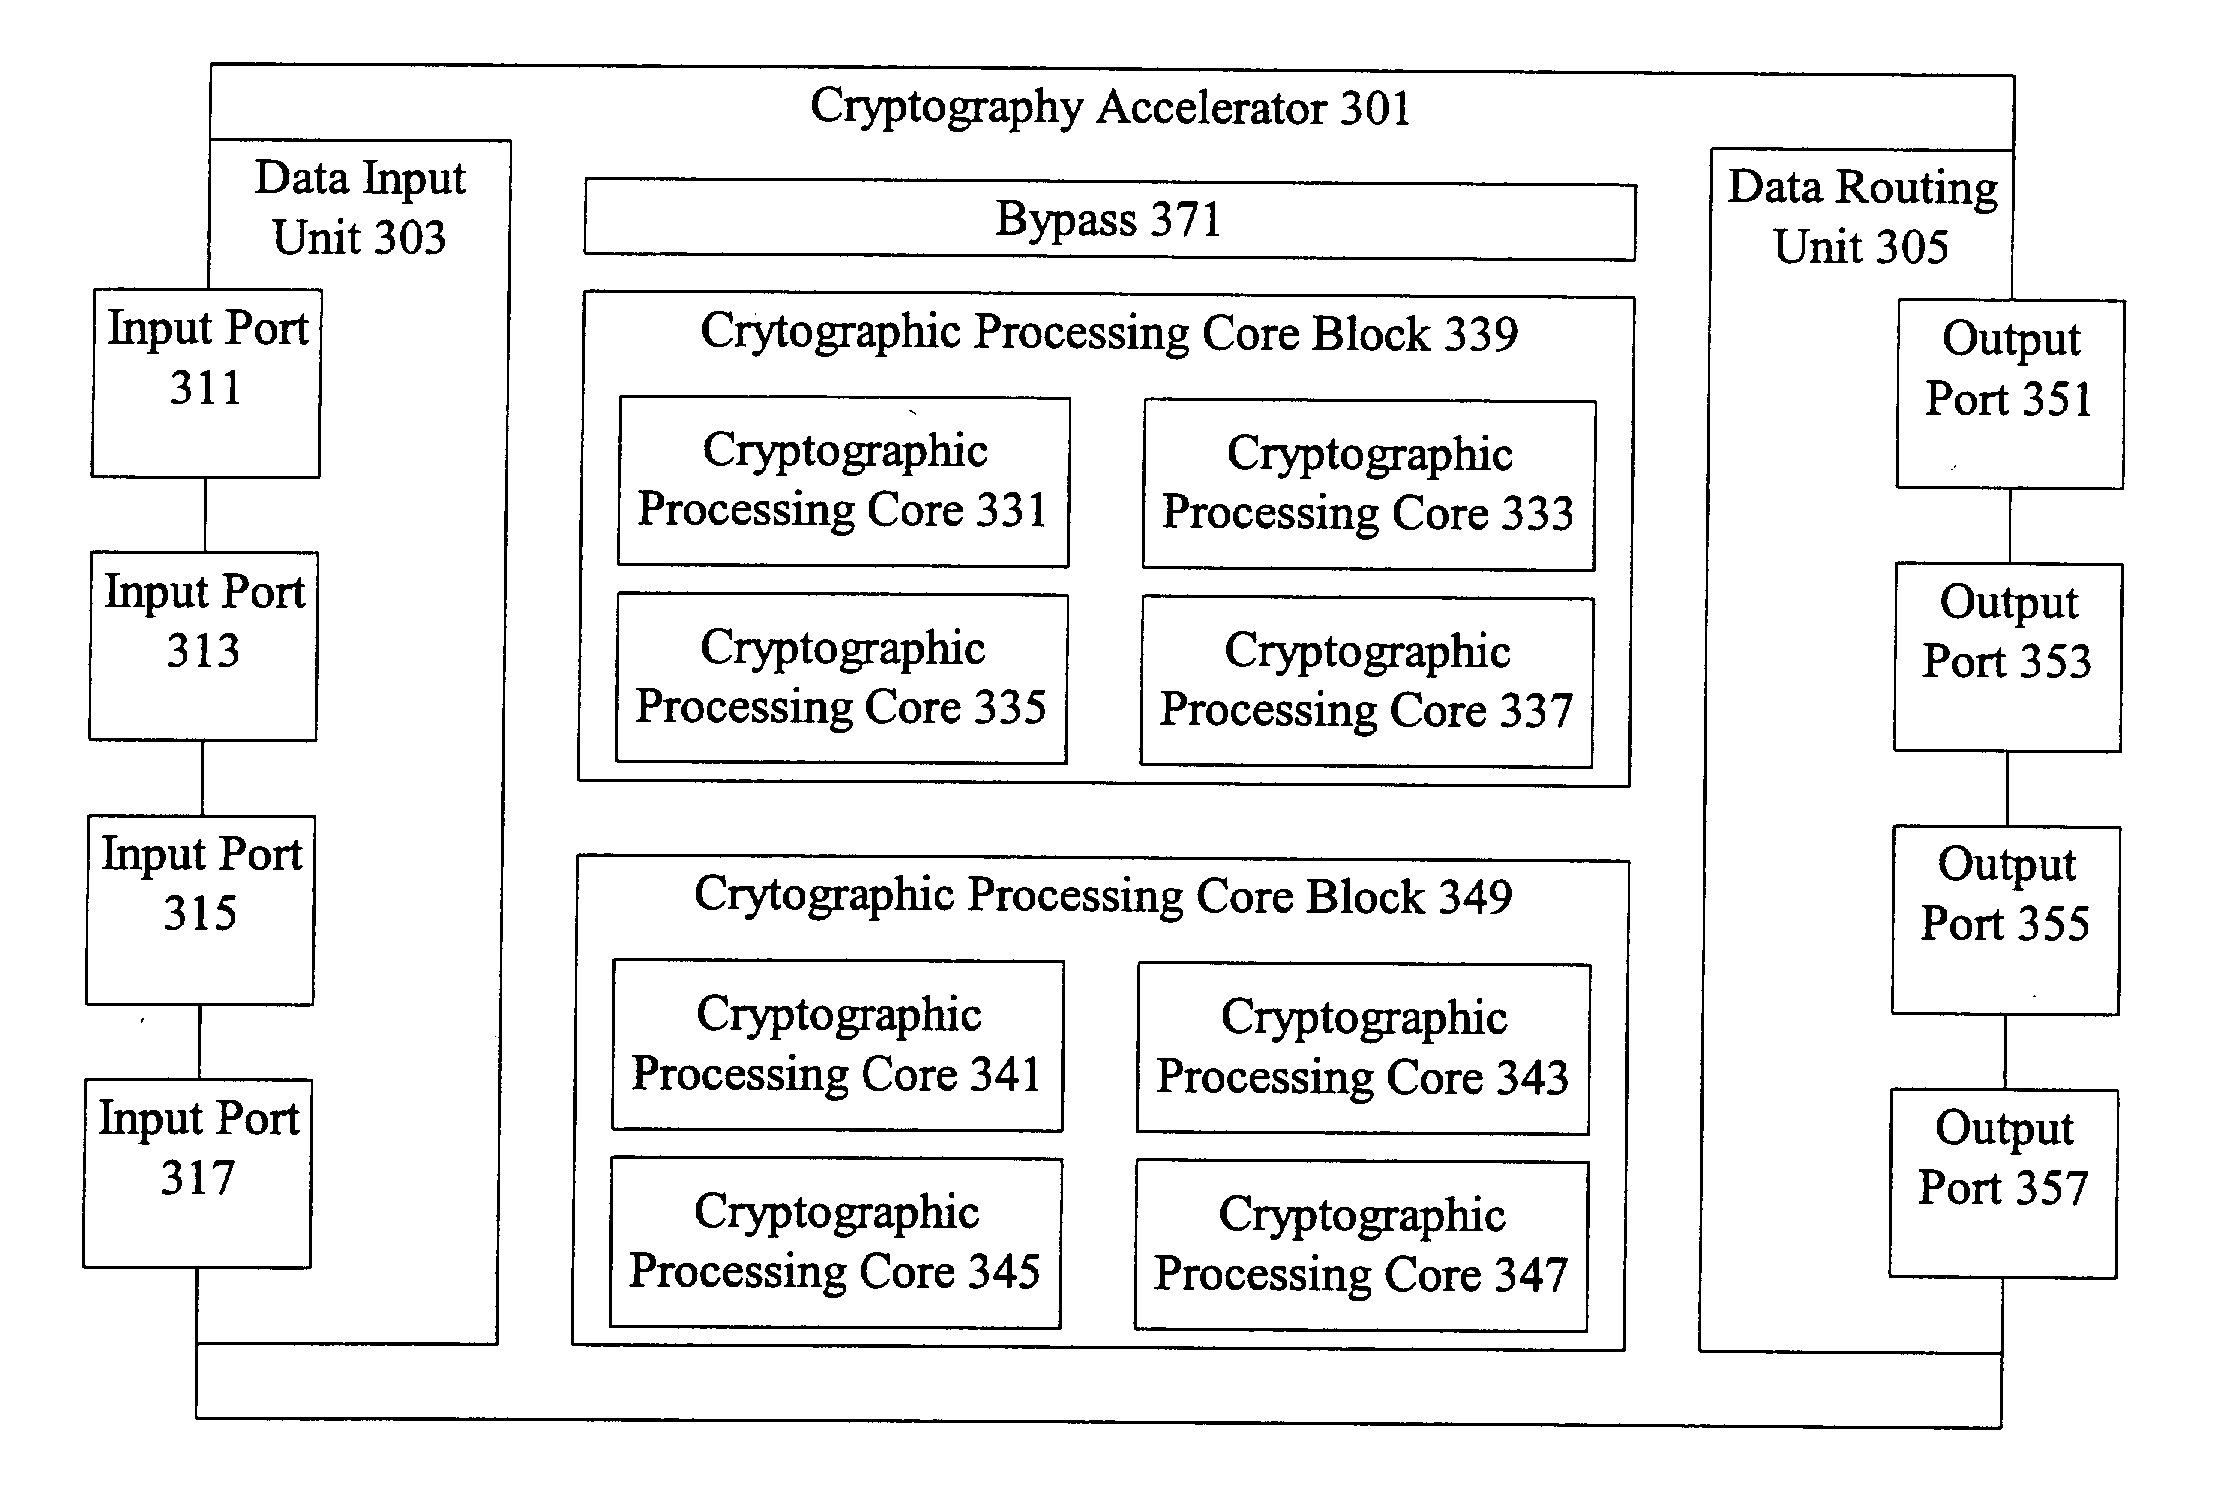 Cryptography accelerator interface decoupling from cryptography processing cores